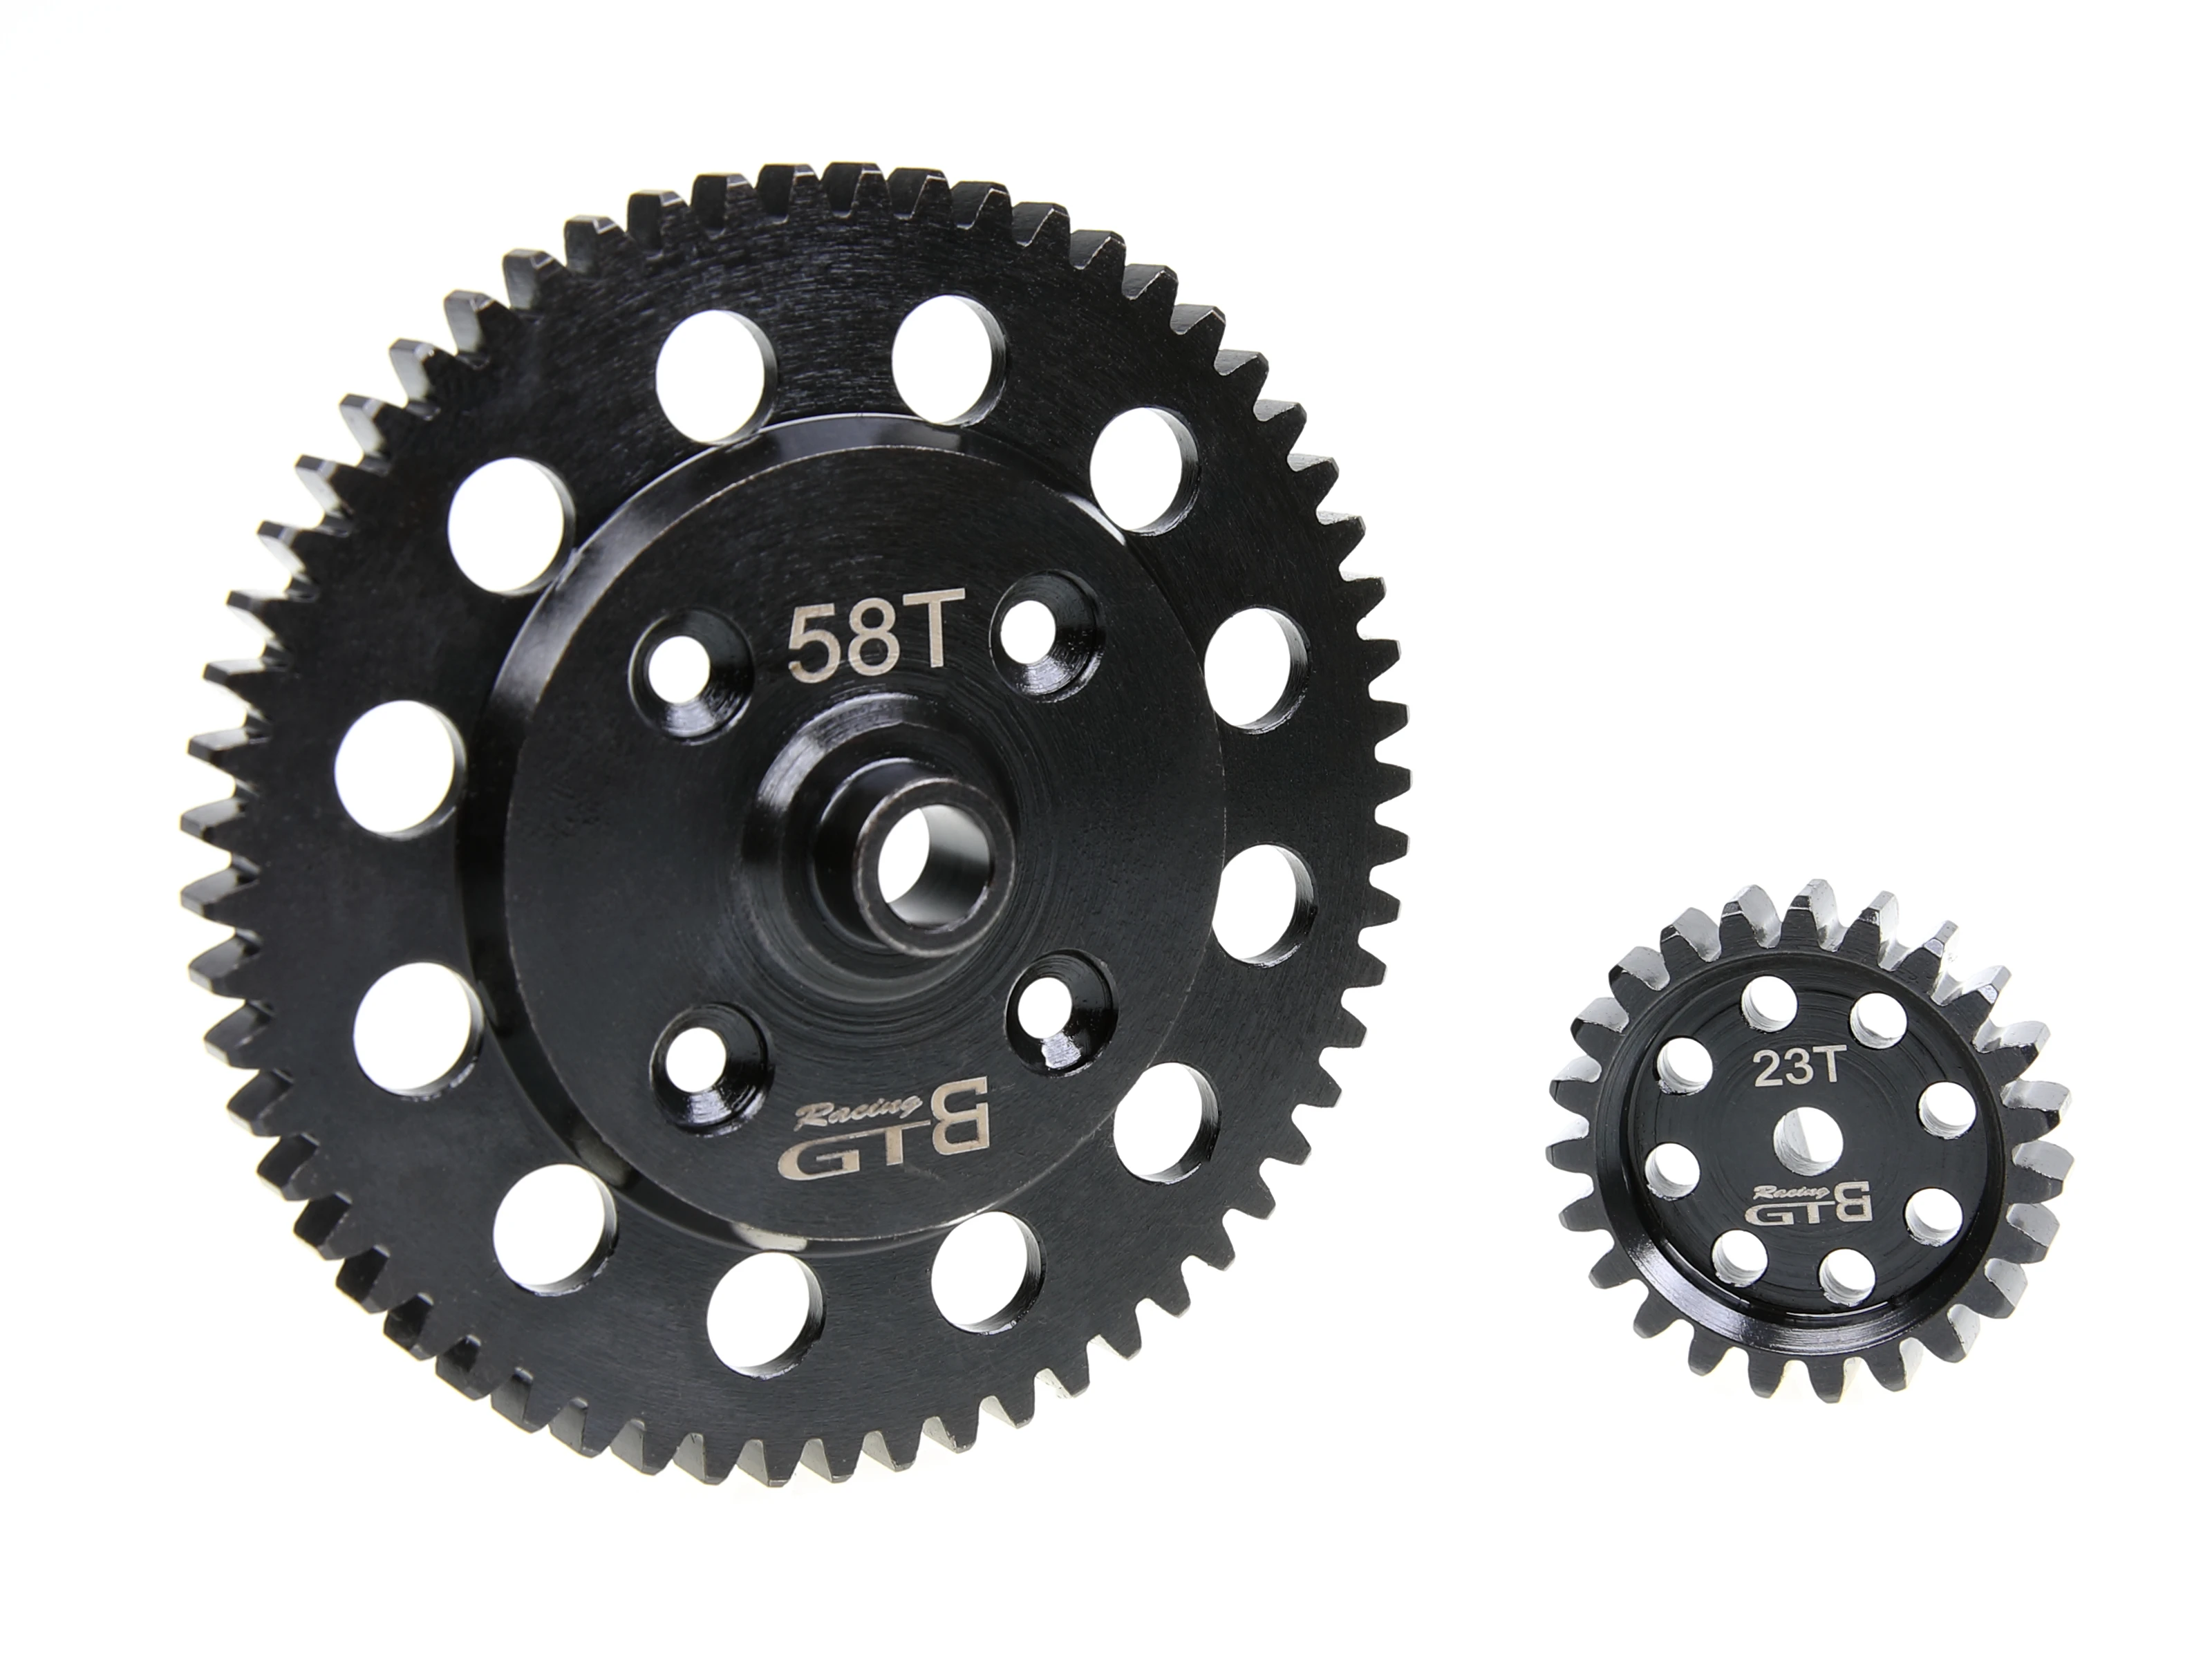 GTBracing 1:5 RC Car LOSI DBXL 57T/24T 58T/23T 59T/22T 60T/21T 61T/20T Steel Pinion Spur Gears enlarge